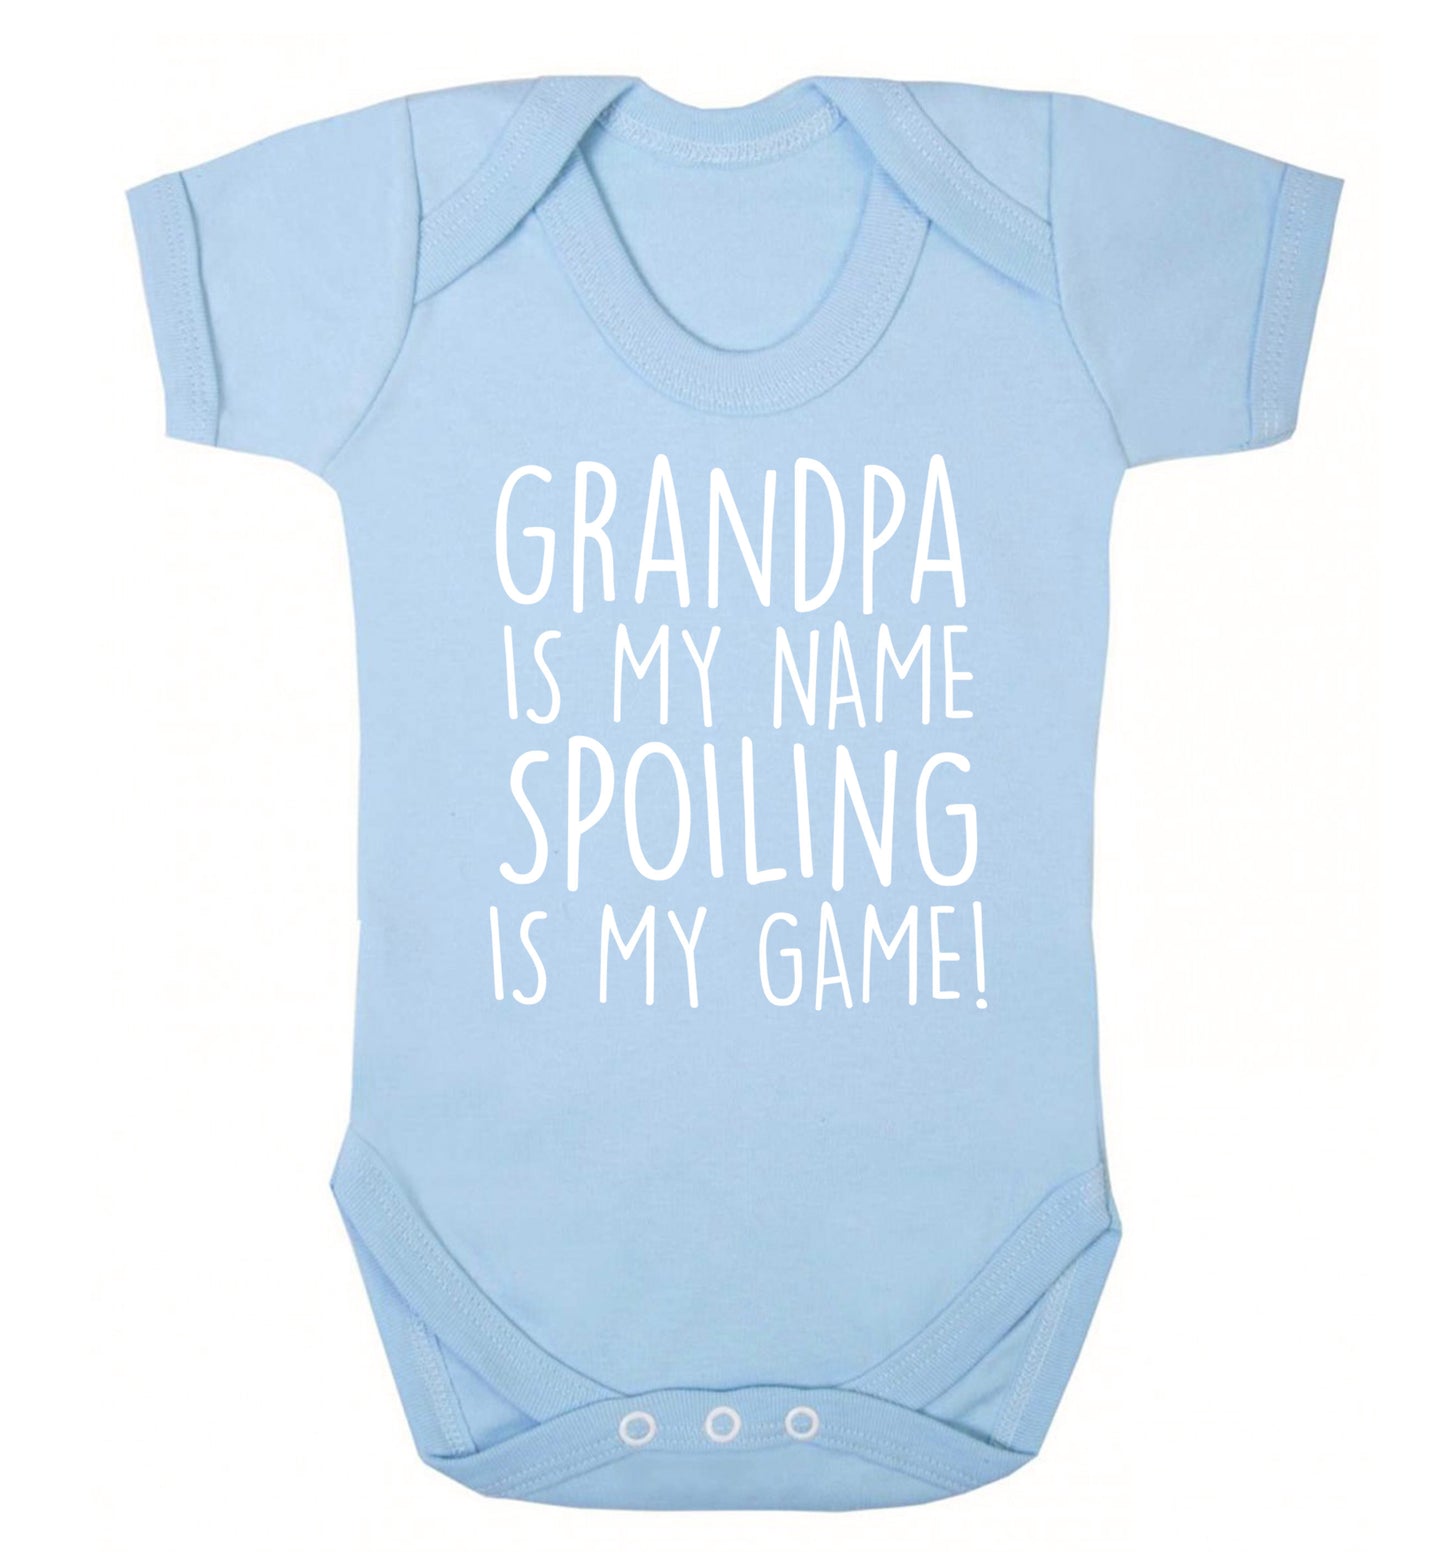 Grandpa is my name, spoiling is my game Baby Vest pale blue 18-24 months